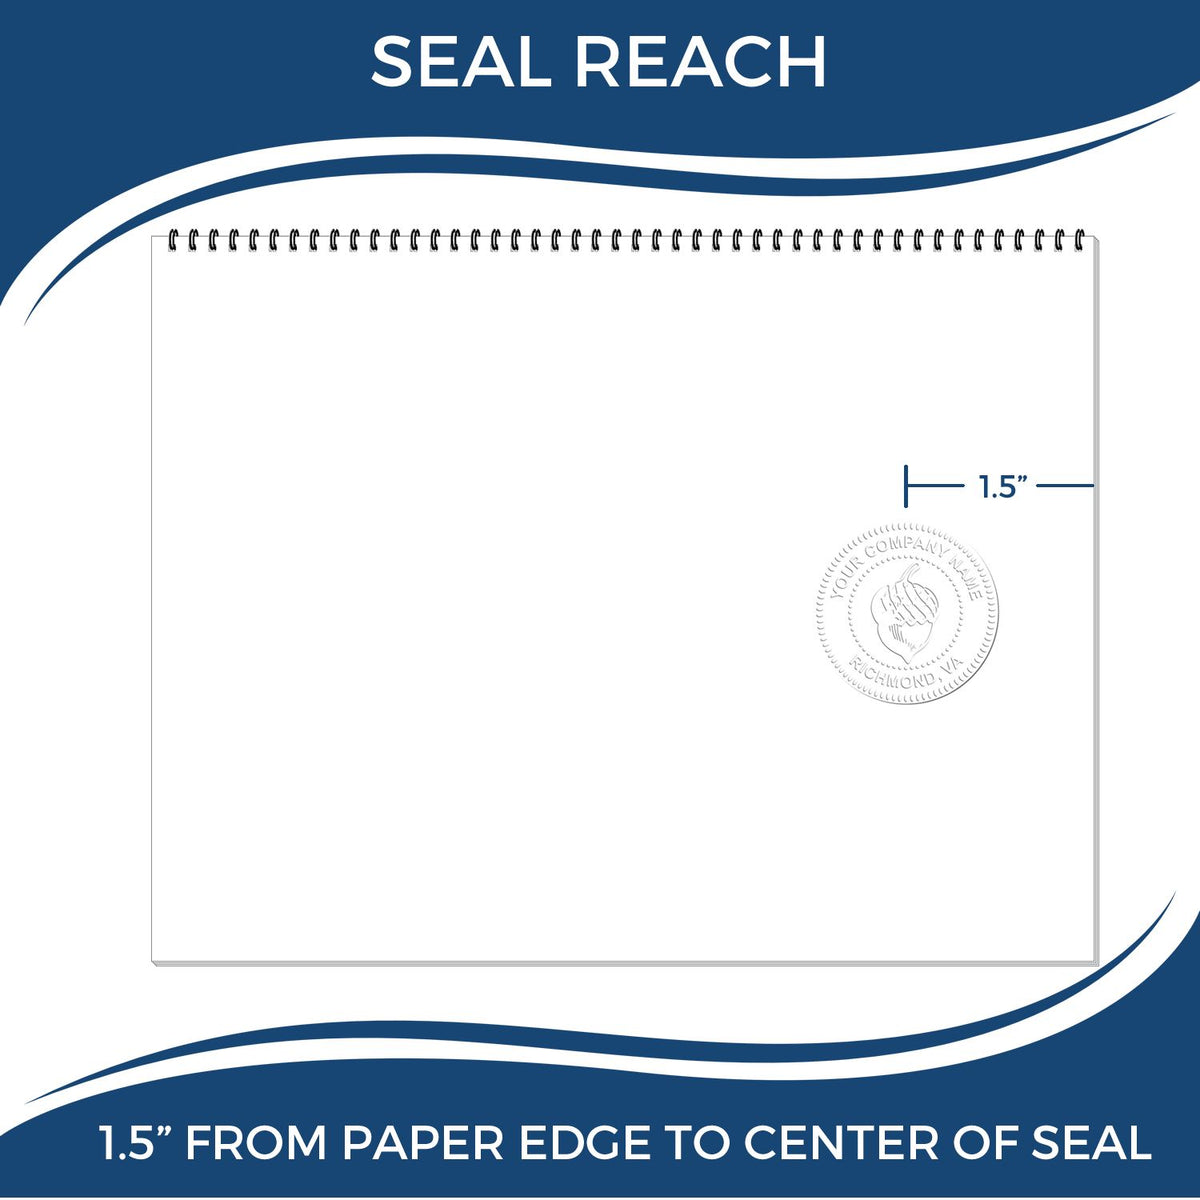 An infographic showing the seal reach which is represented by a ruler and a miniature seal image of the Hybrid Mississippi Land Surveyor Seal